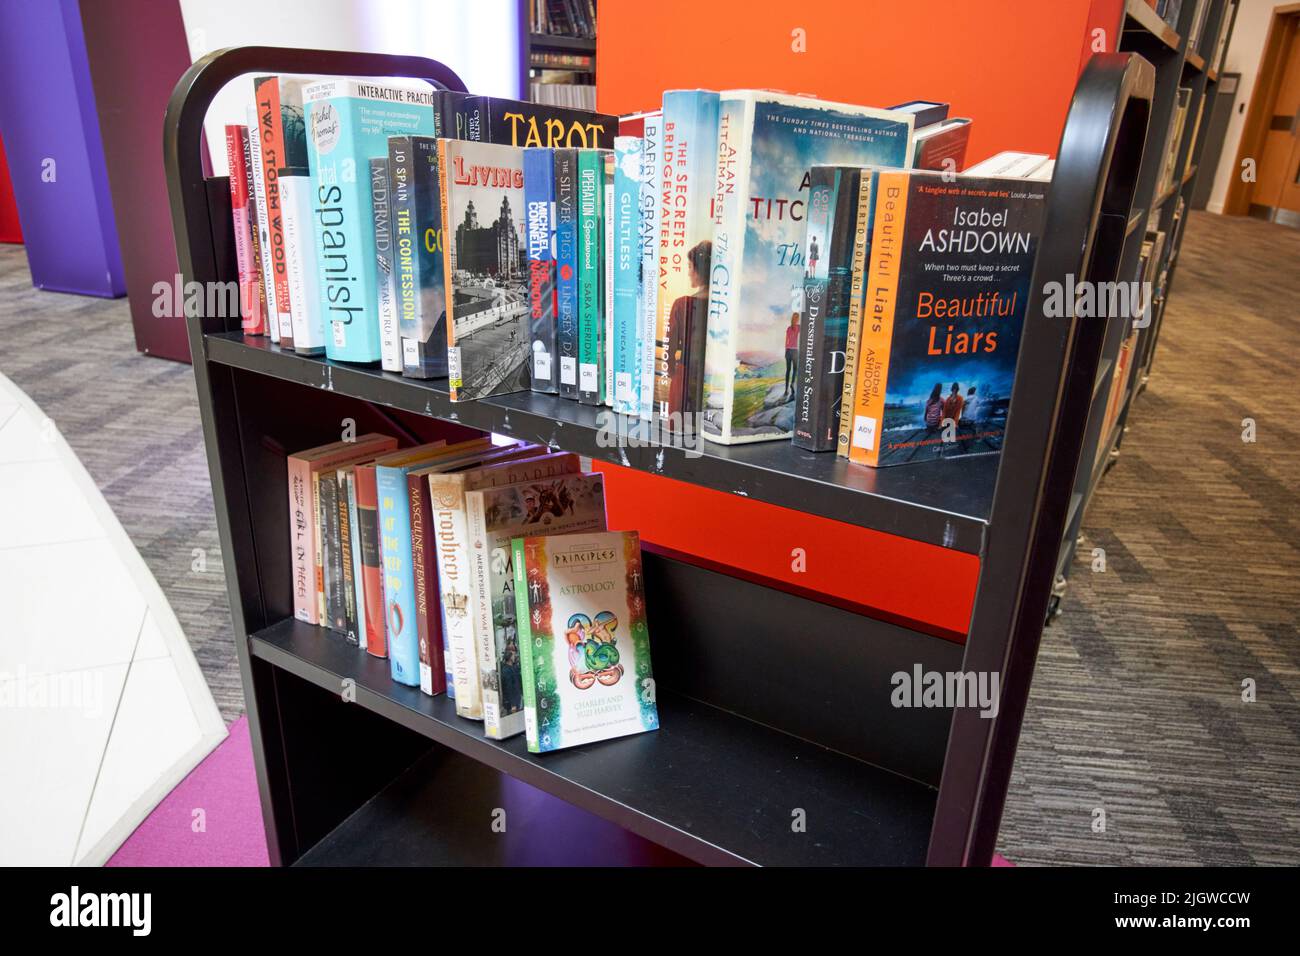 returned books to be sorted and catalogued on trolley in Liverpool Central Library merseyside england uk Stock Photo